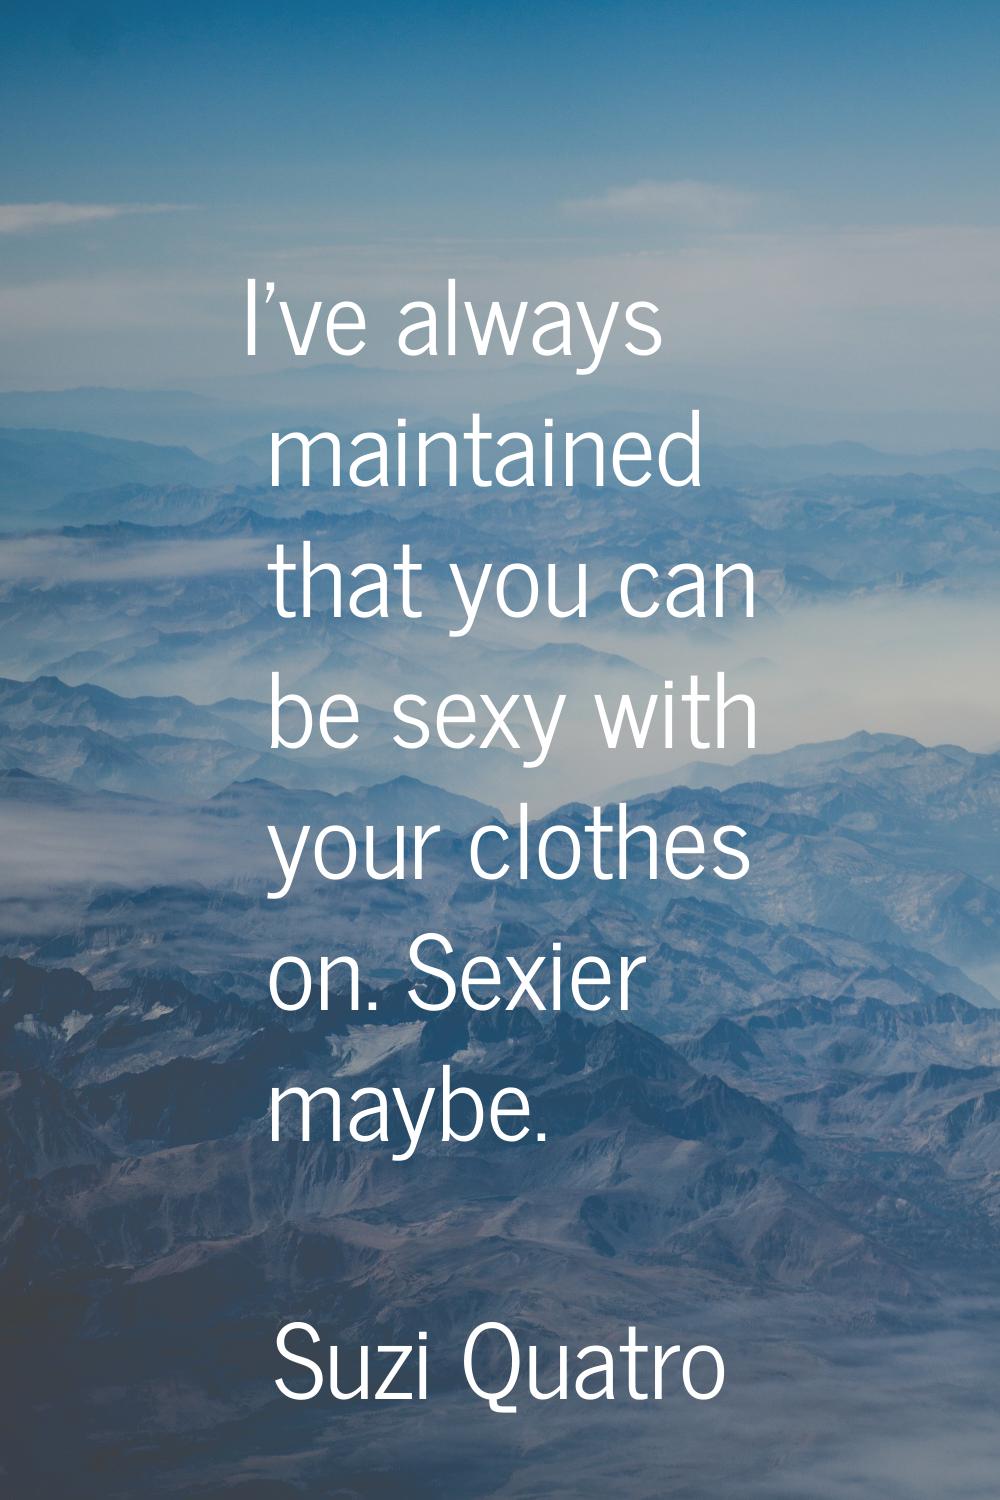 I've always maintained that you can be sexy with your clothes on. Sexier maybe.